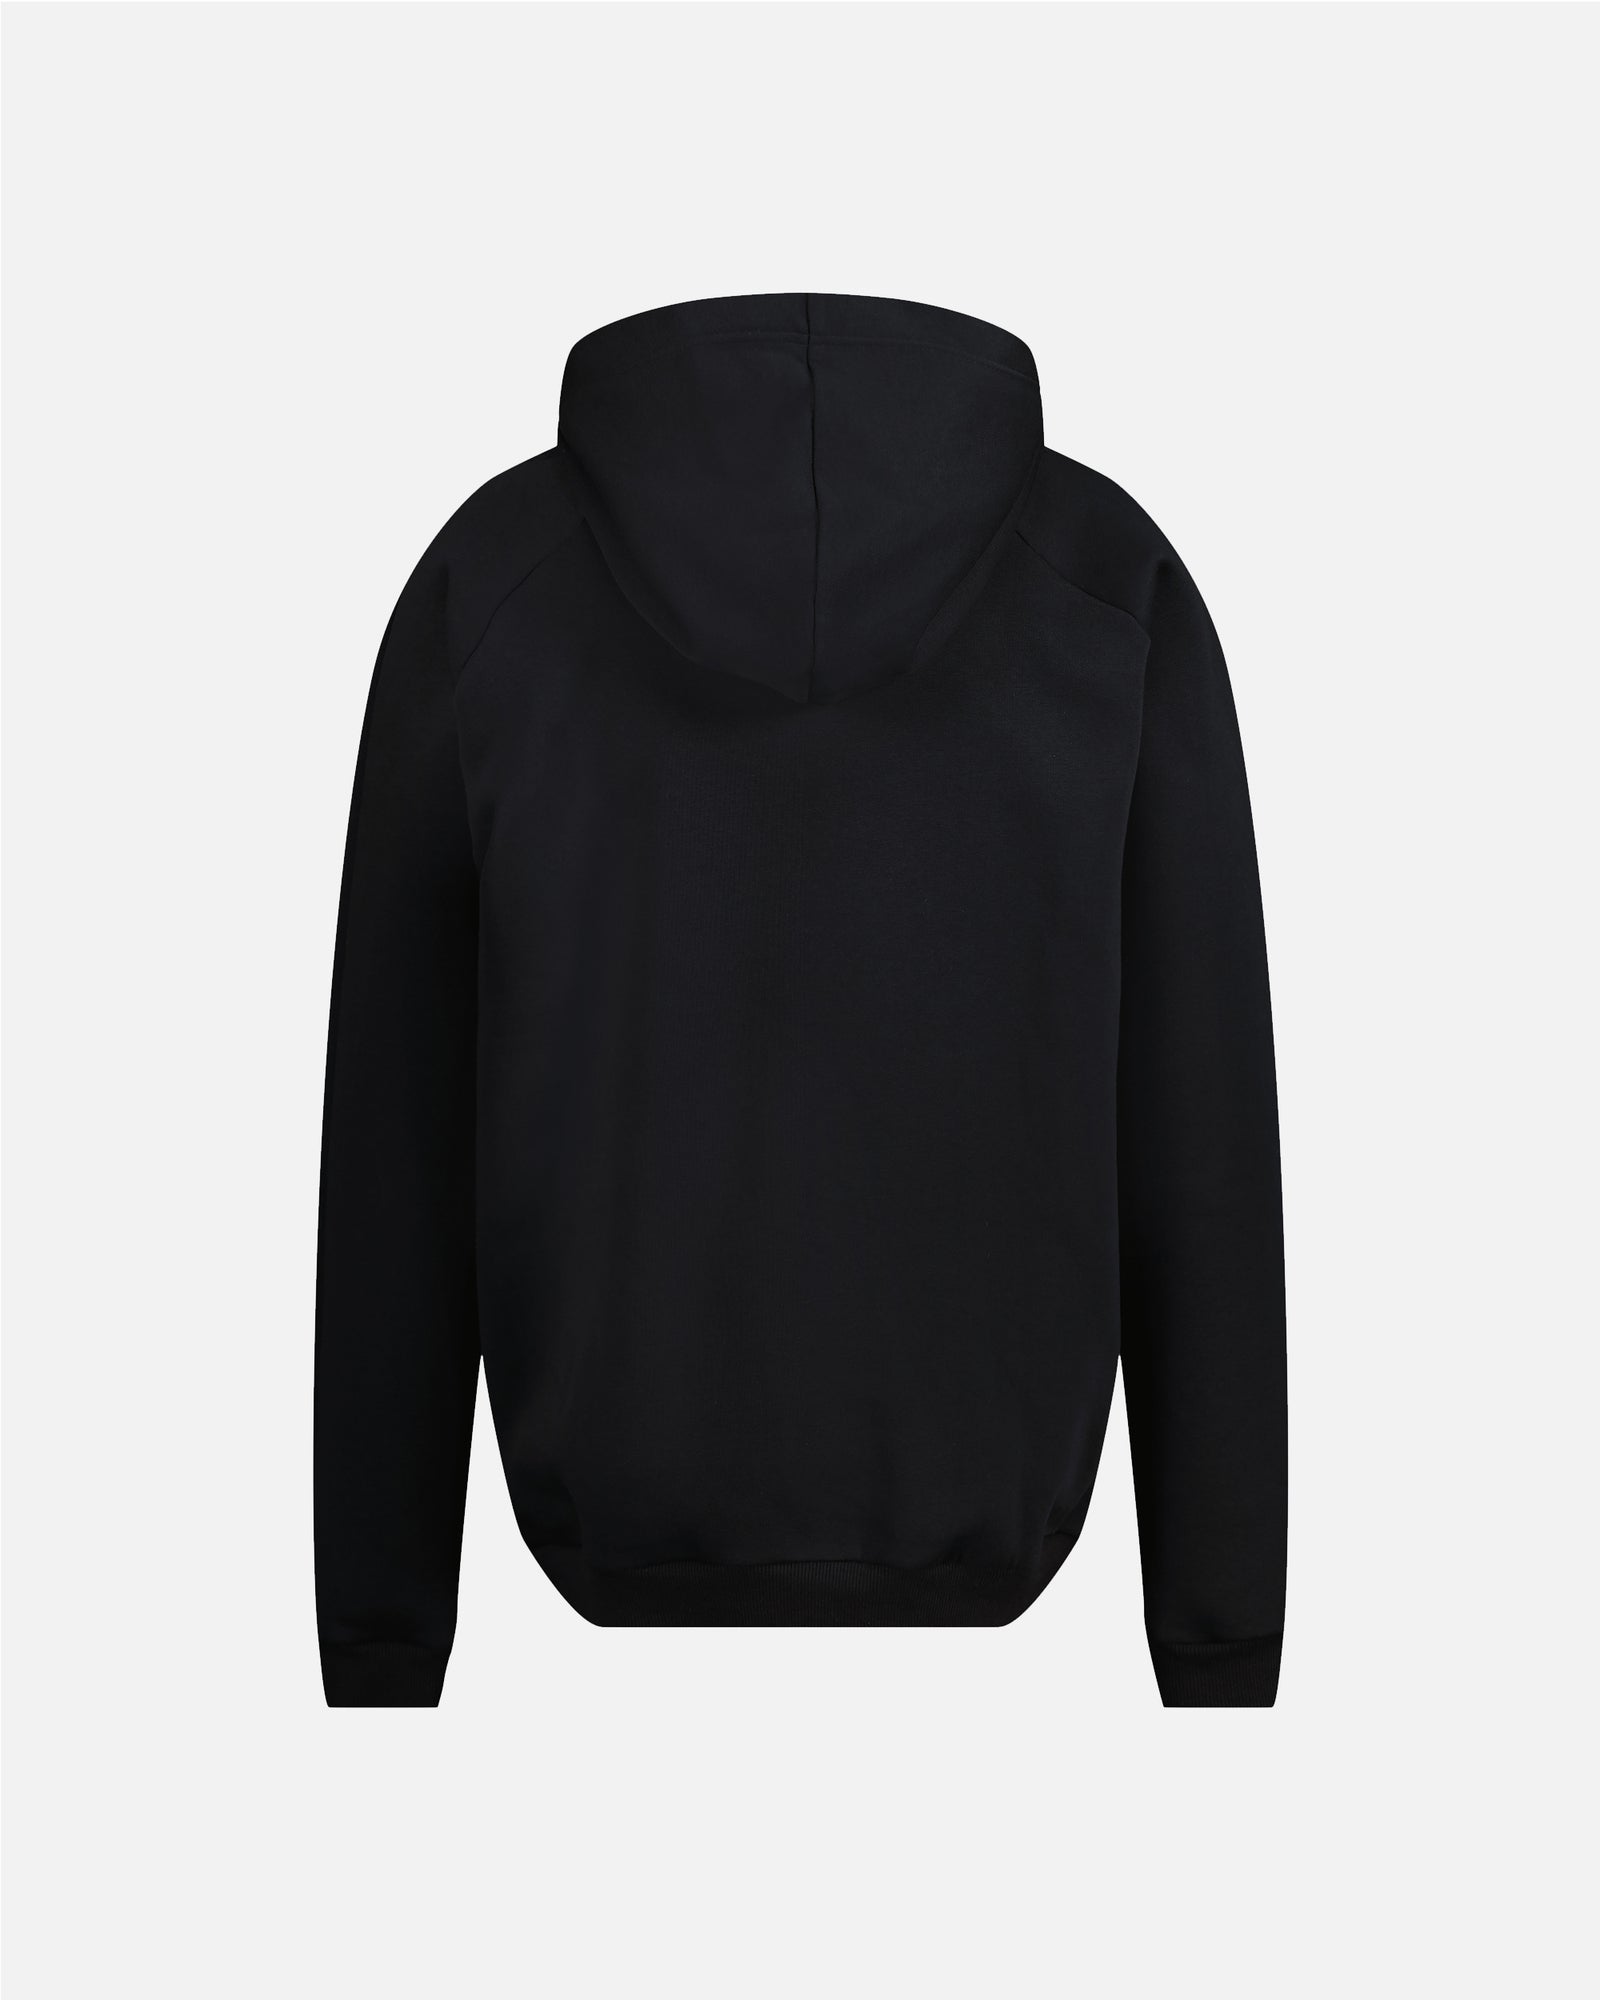 OUTLINE COTTON HOODIE